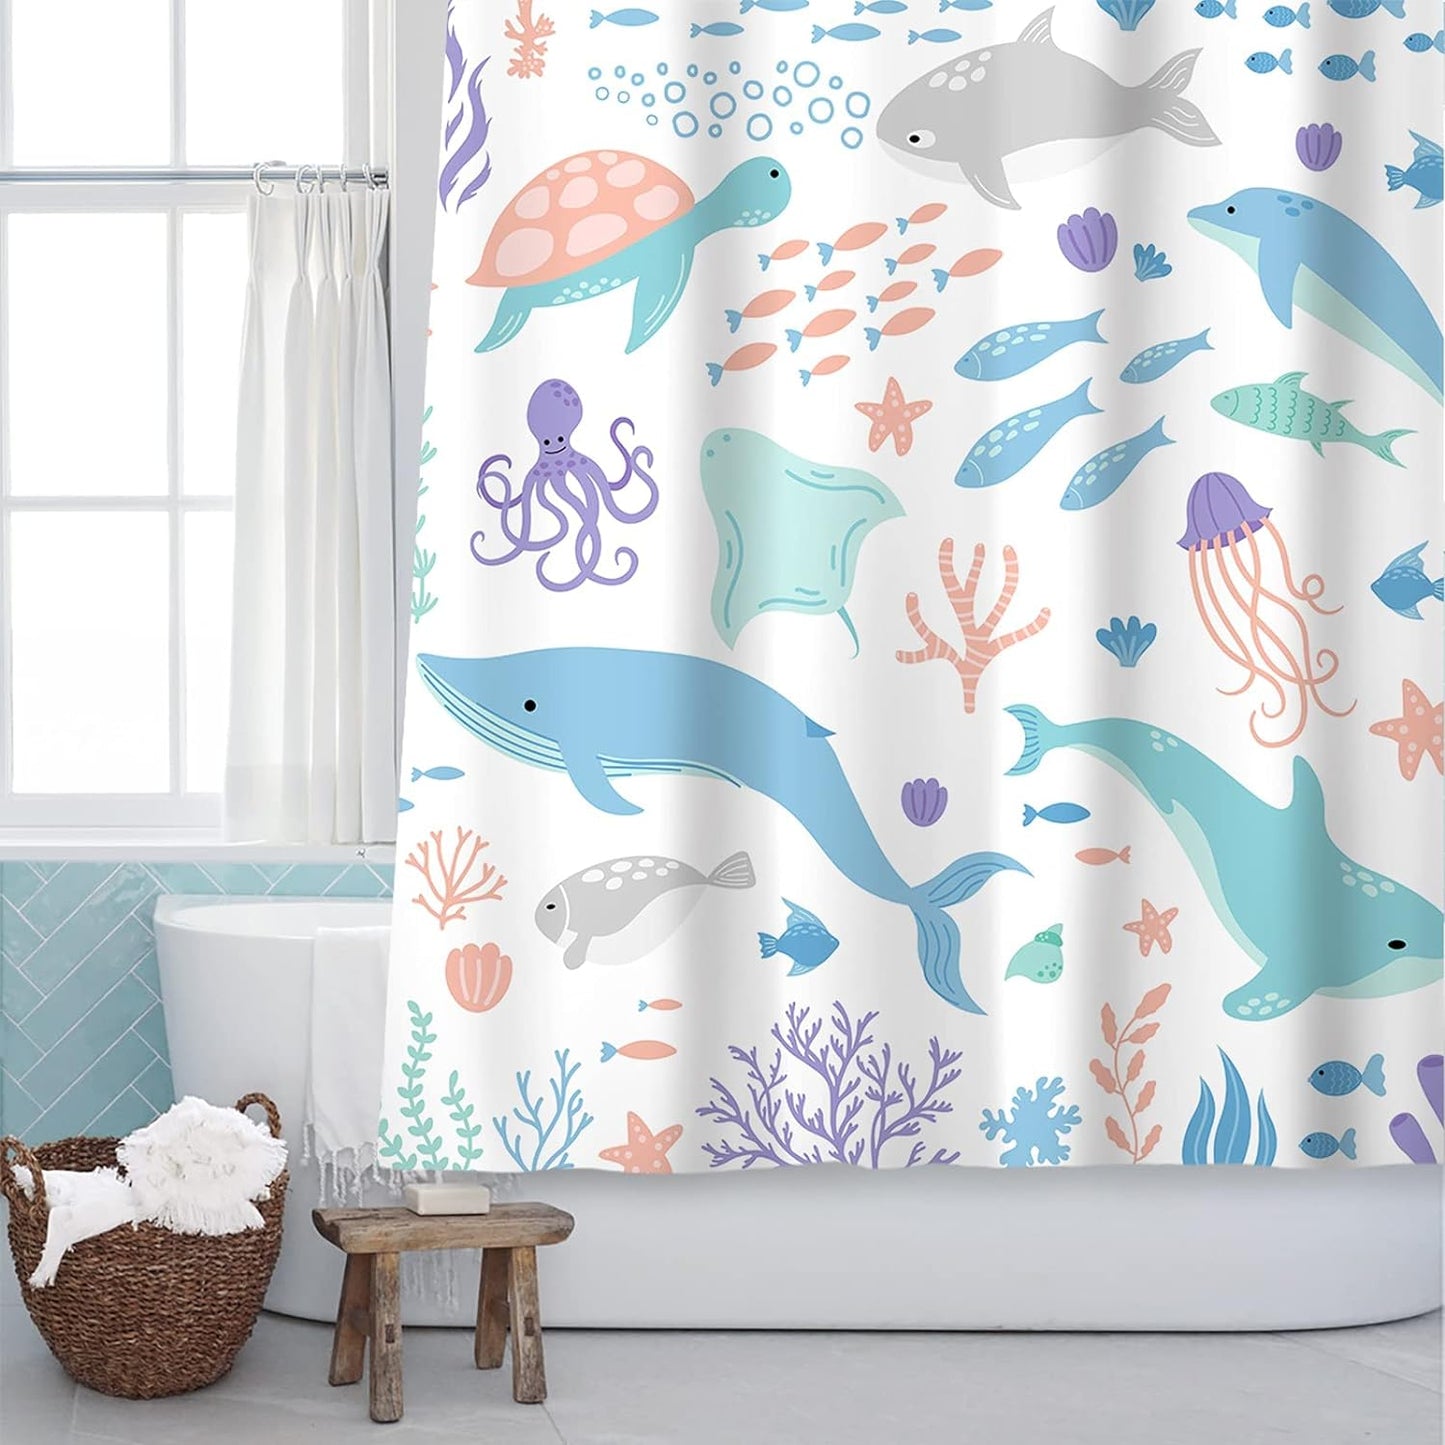 Sunlit Lovely Cartoon Pastel Colors Aquarium Baby Shower Curtain, Ocean Creatures Light Blue Fabric Shower Curtain for Kids, Turtle Dolphins and Fishes Coral Bathroom Decor Curtain for Children